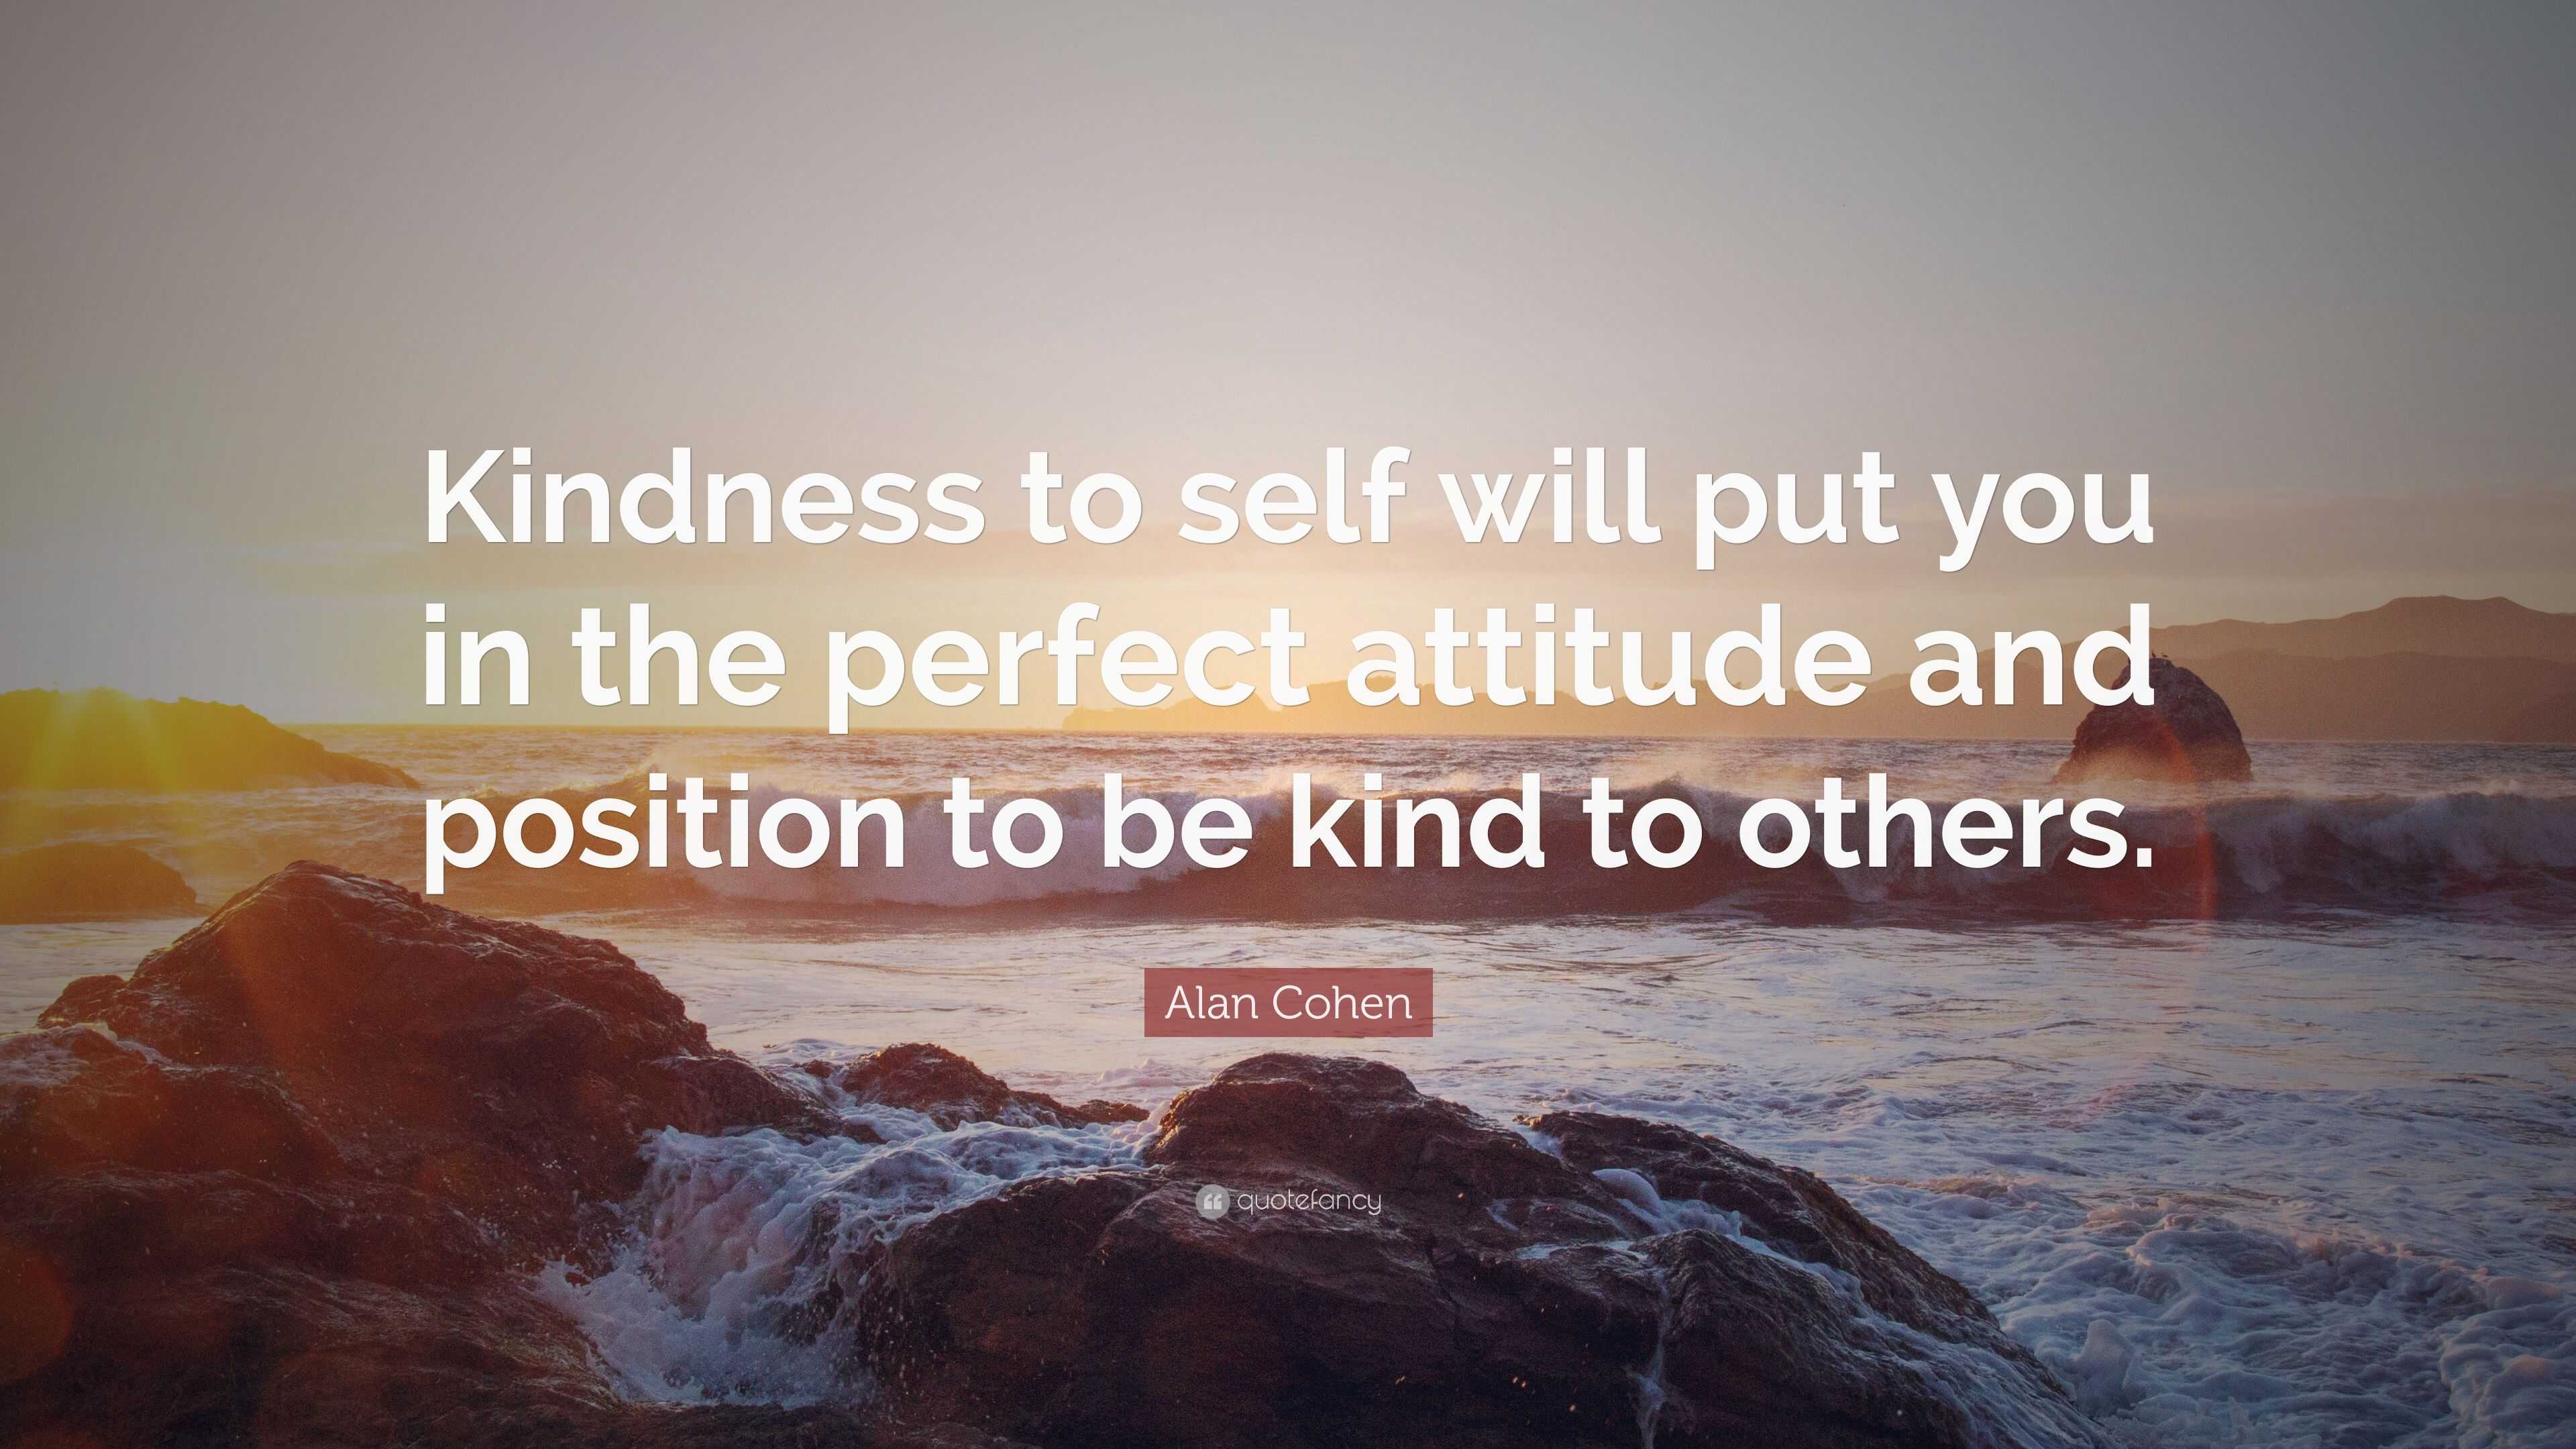 Alan Cohen Quote: “Kindness to self will put you in the perfect ...